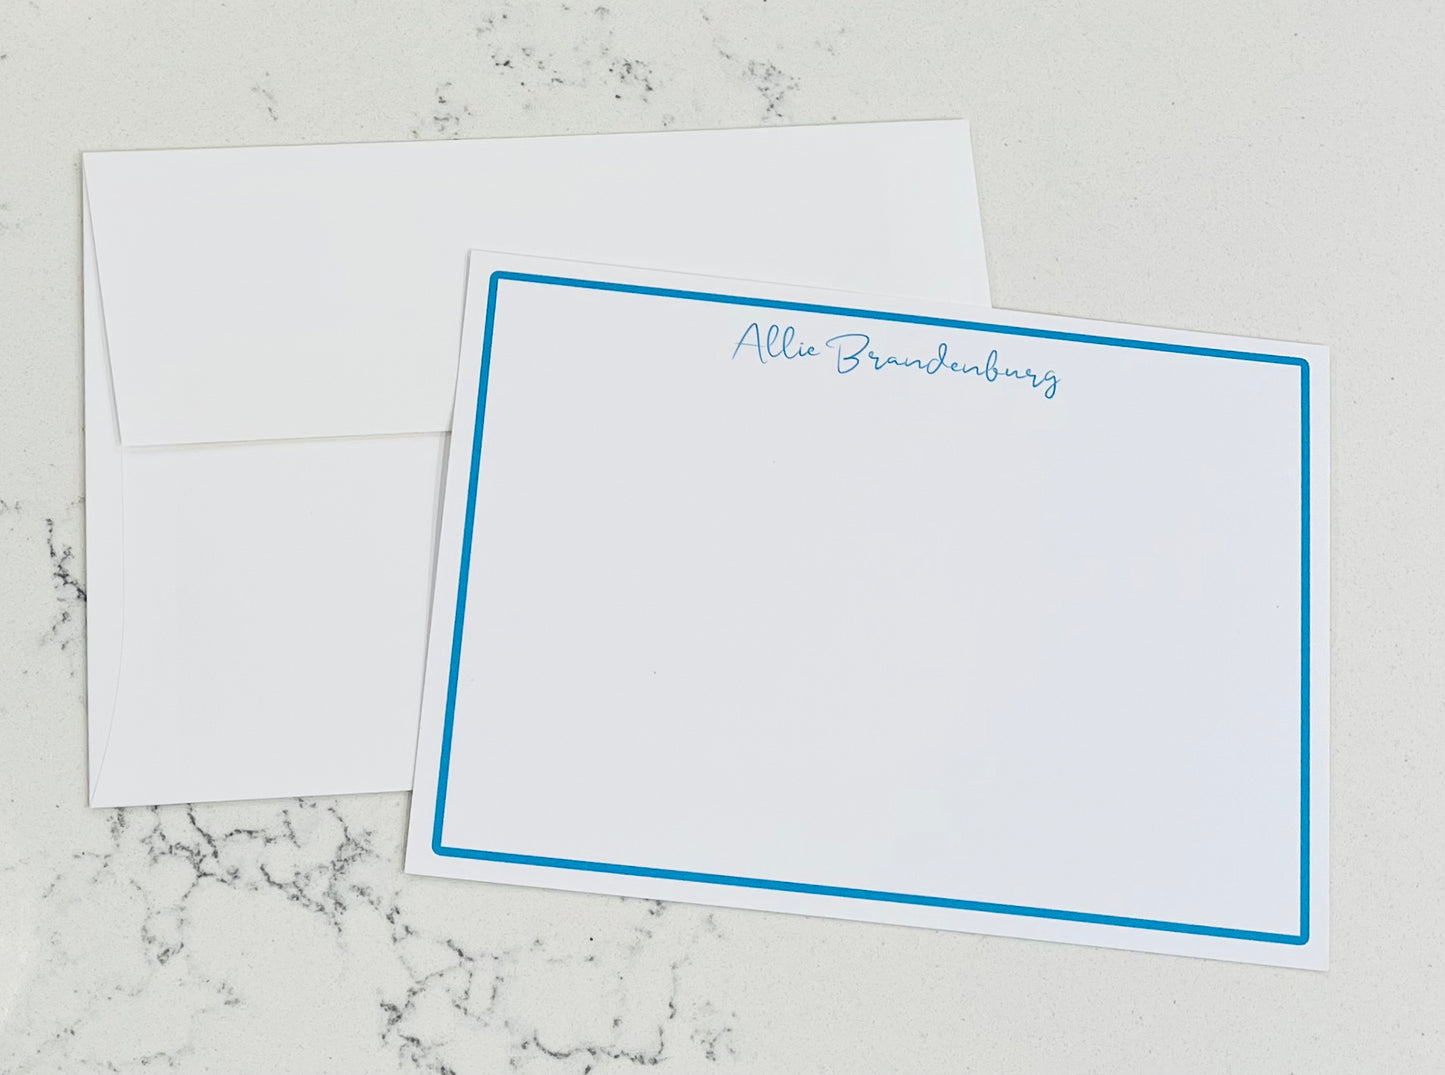 Note Cards, Personalized - Choose your color